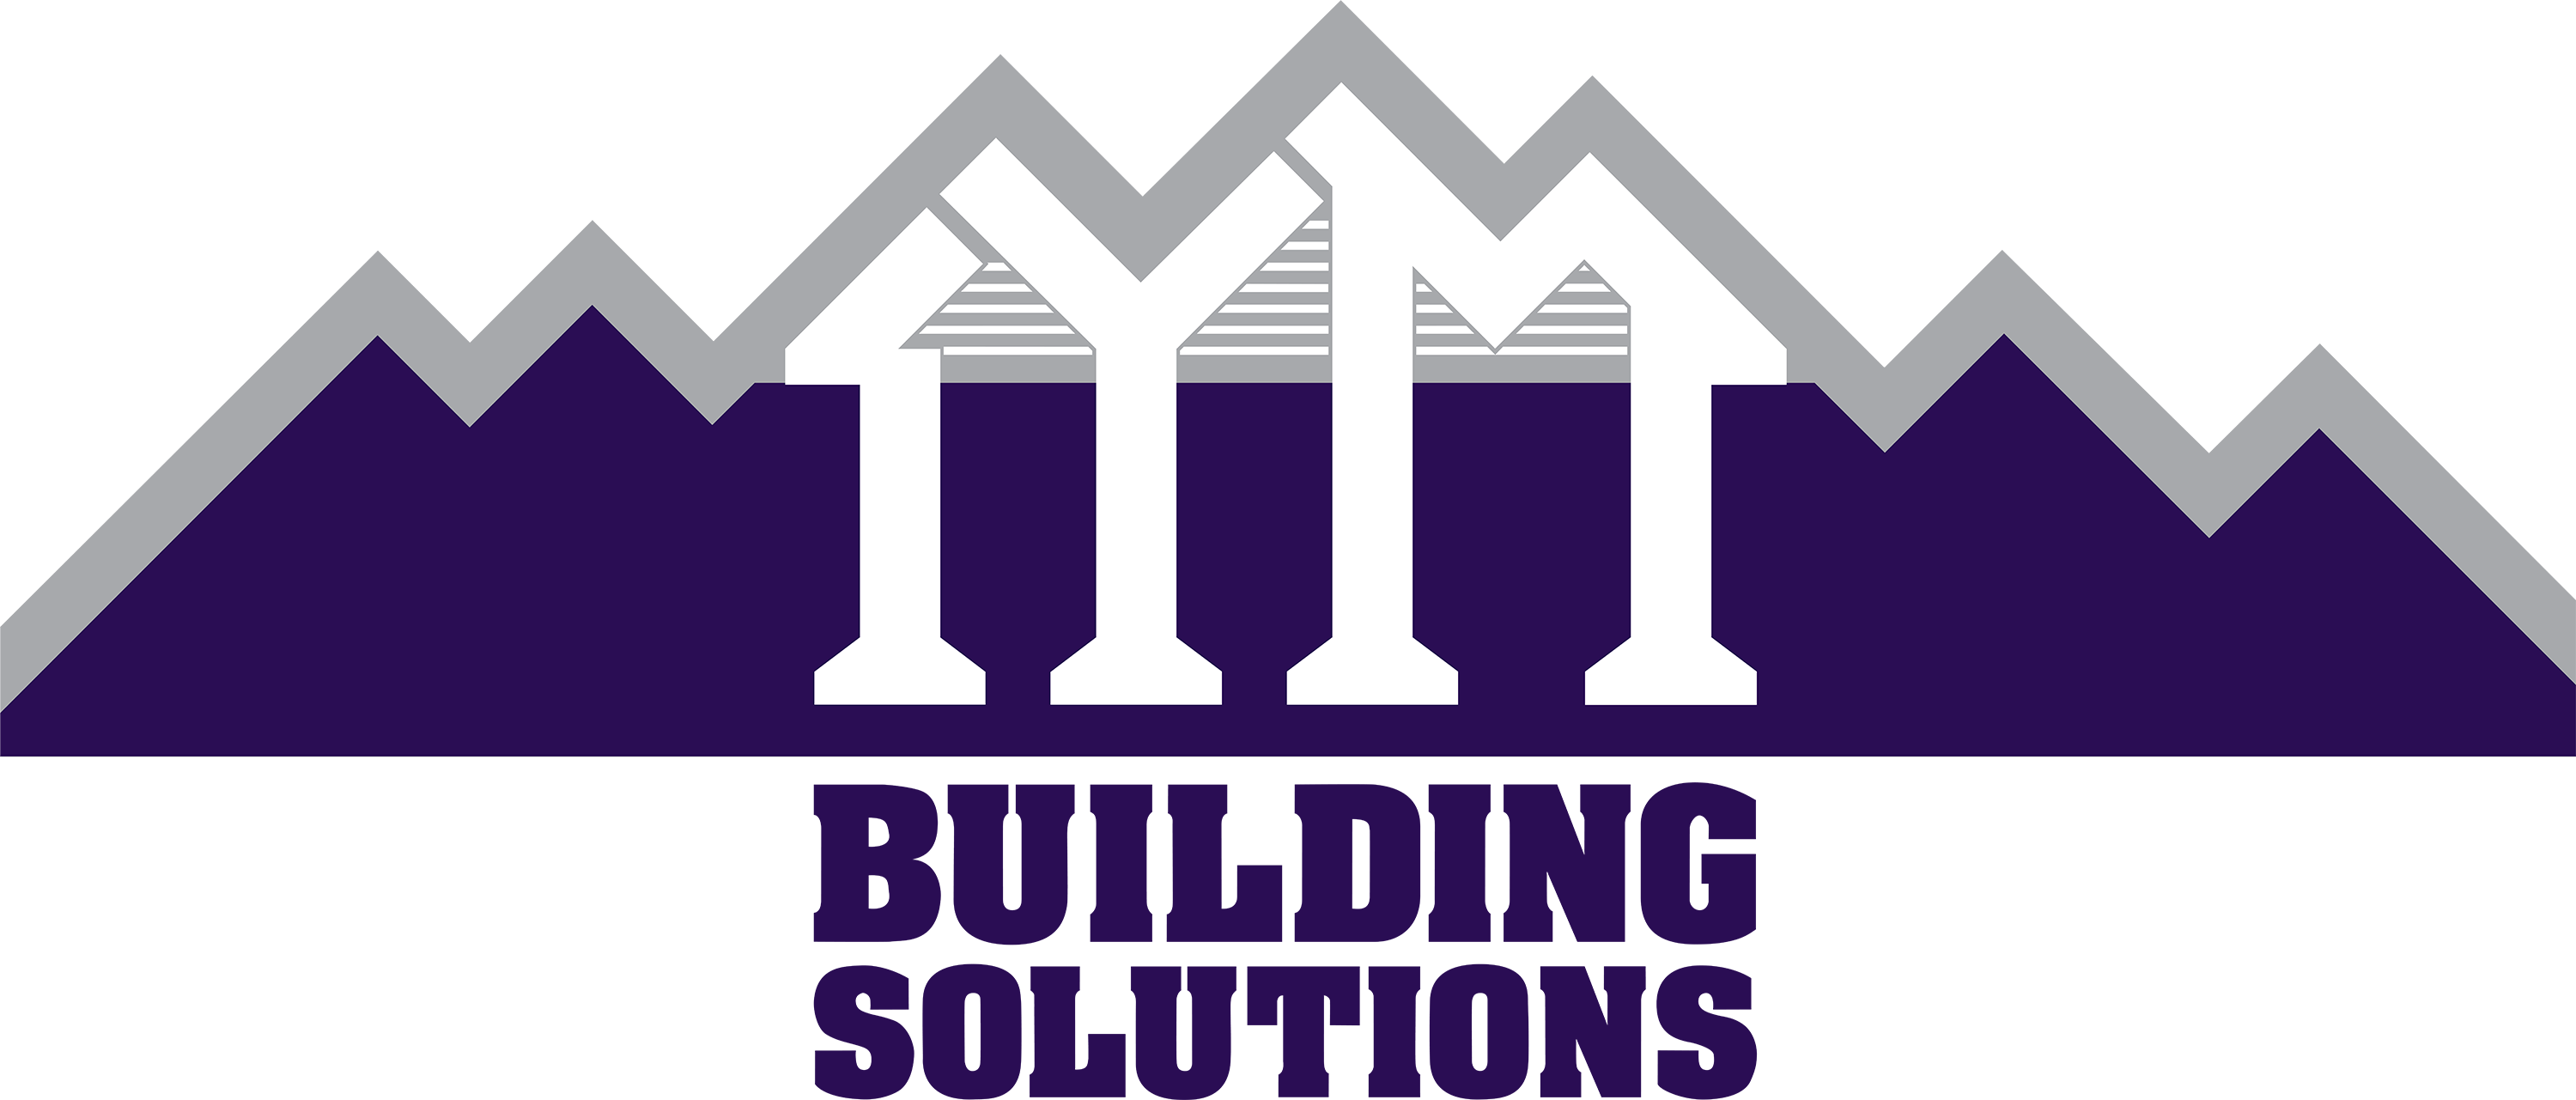 IYM Building Solutions - I'm Your Man For Building and Construction